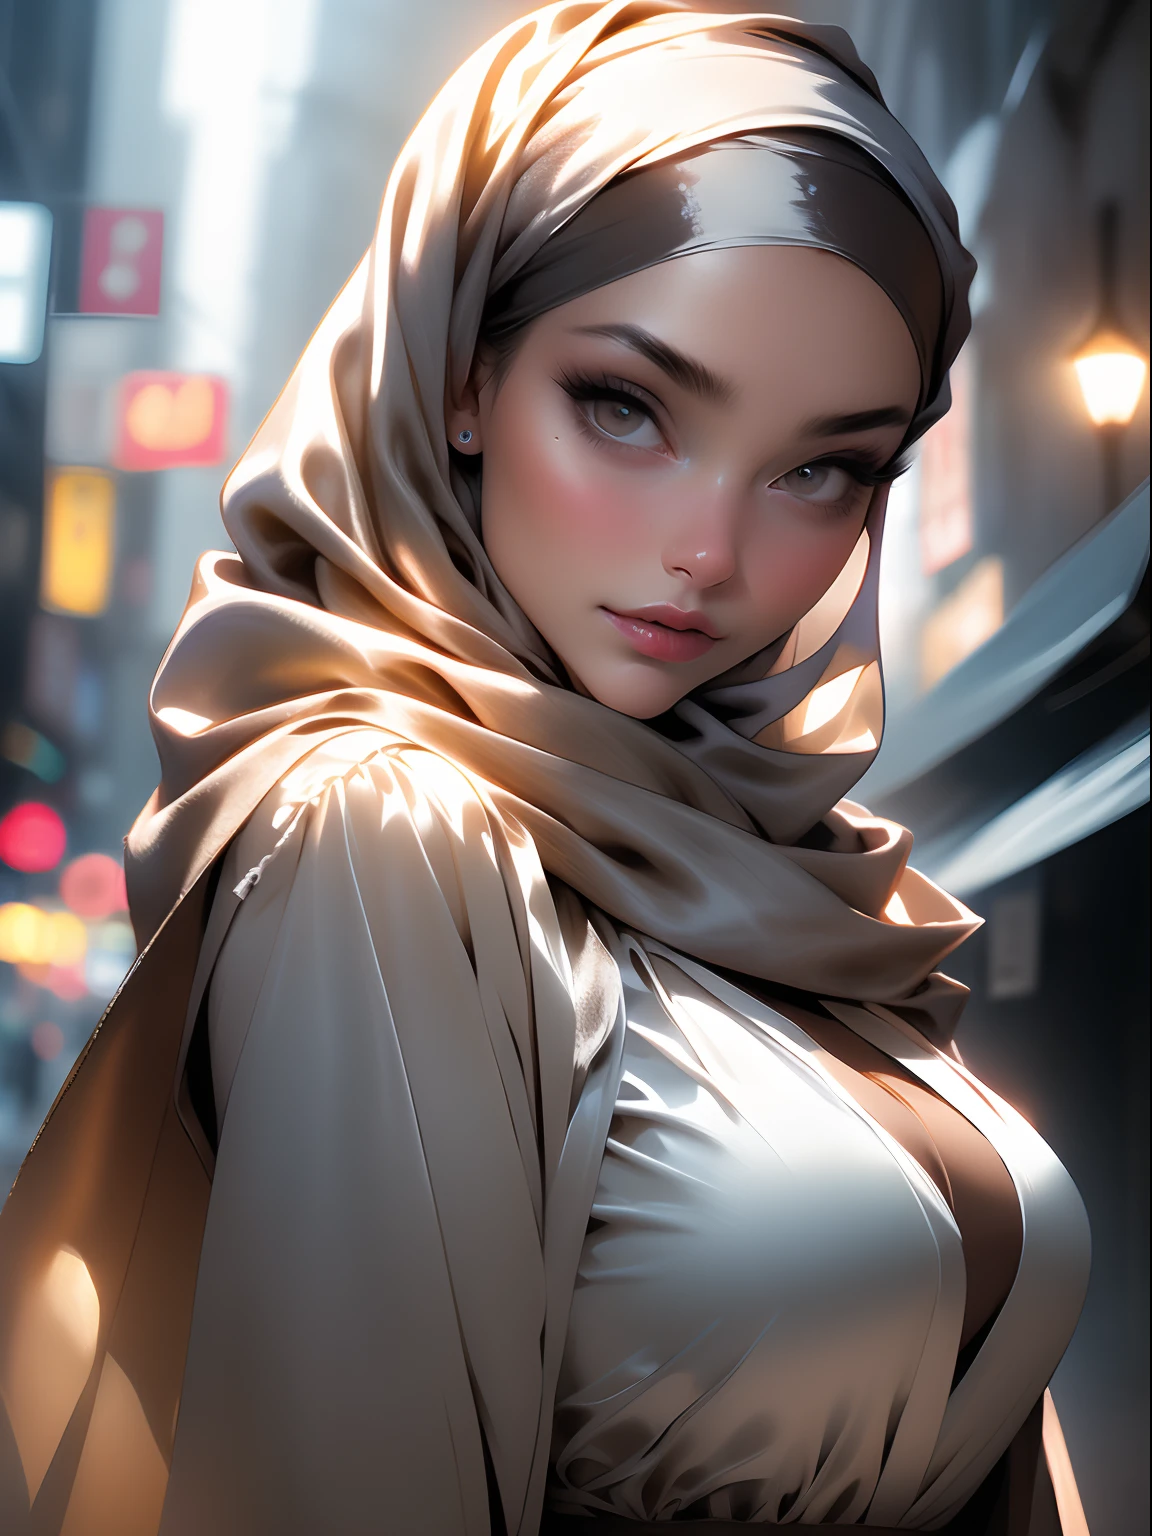 Photo of 25 year old European girl, RAW, beautiful woman, ((gray satin headscarf), loosely tide hijab style), ((portrait)), (Detailed face: 1.2)), (Detailed facial features)), manga eyes, (Fine skin), pale skin, high detail ((brown satin shirt and satin long maxi skirt)), slim body, megacity environment, (cold color), wet, moist, reflection, (masterpiece) ( Perfect proportions) (realistic photos) (highest quality) (detail) shot with Canon EOS R5, 50mm lens, f/2.8, HDR, (8k) (wallpaper) (movie lighting) (dramatic lighting) (sharp focus) (complex) fashion